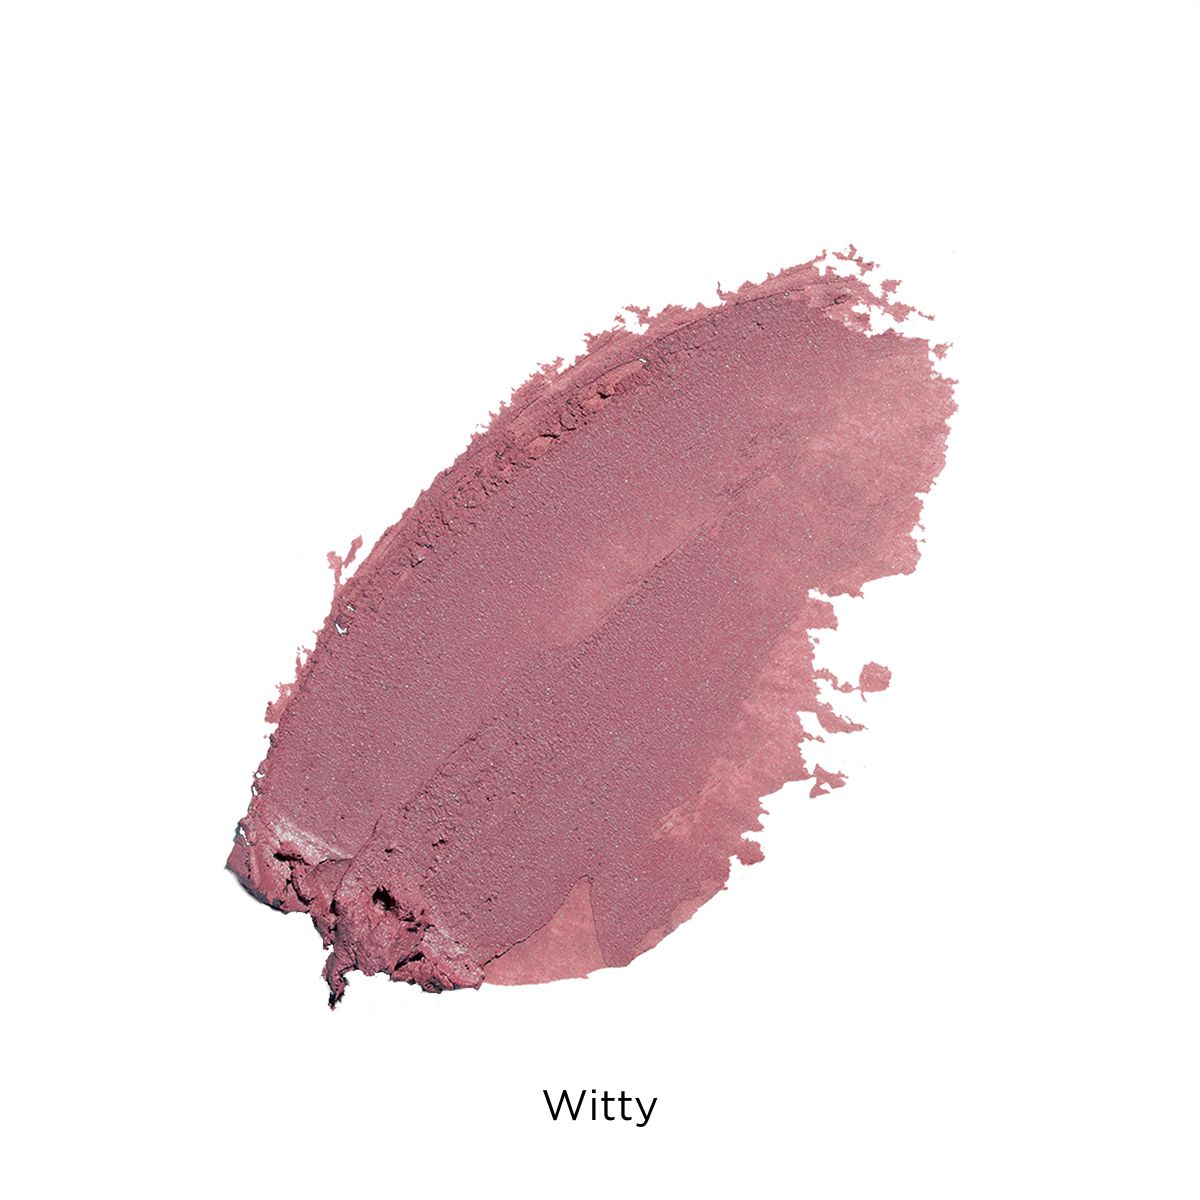 noal-beauty-witty-swatch-3-in-1-color-stick-lips-eyes-cheeks